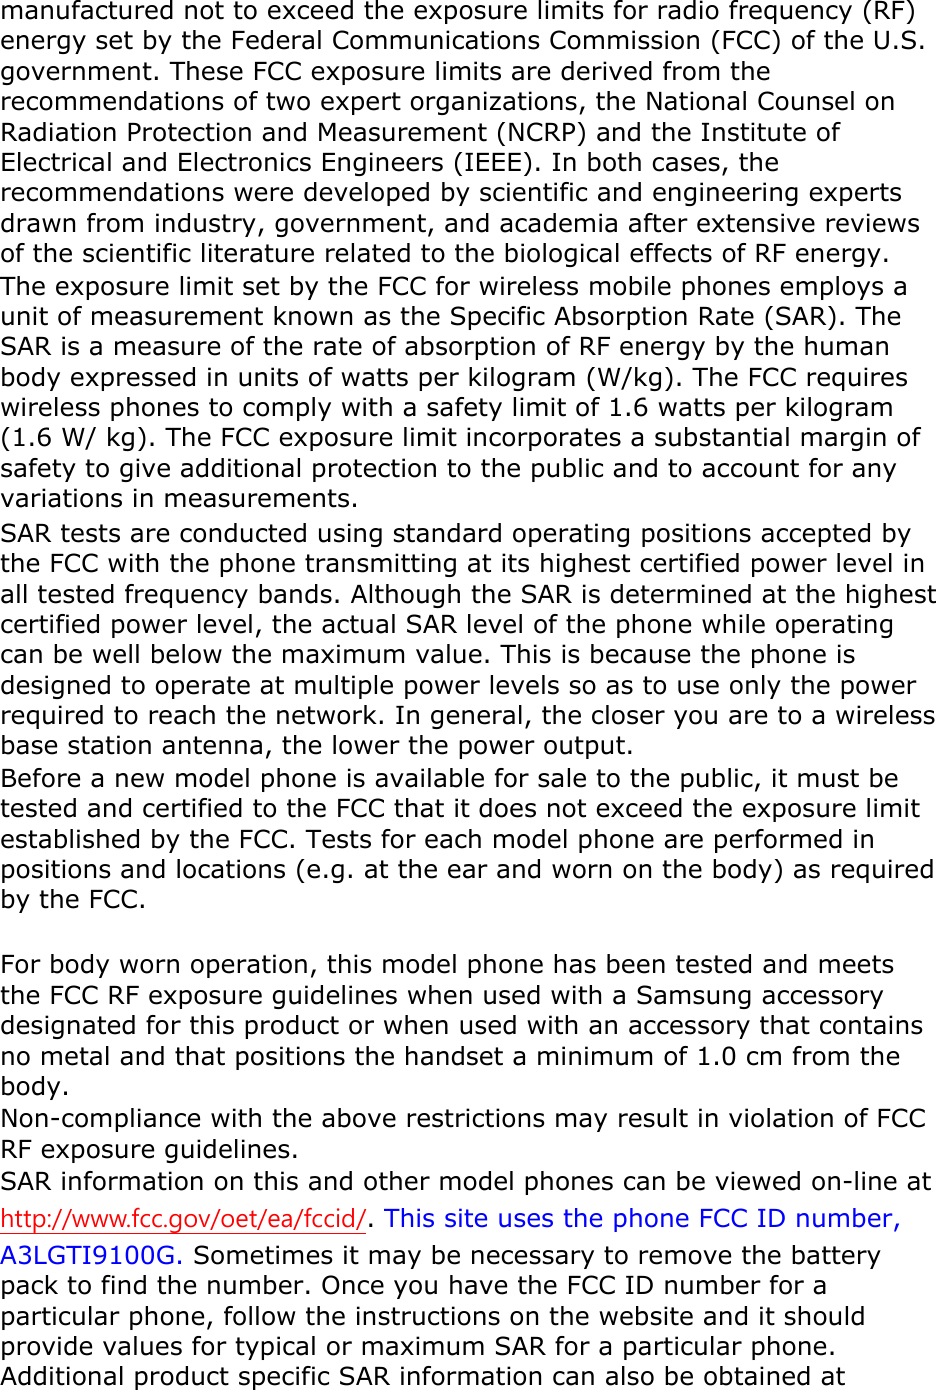 manufactured not to exceed the exposure limits for radio frequency (RF) energy set by the Federal Communications Commission (FCC) of the U.S. government. These FCC exposure limits are derived from the recommendations of two expert organizations, the National Counsel on Radiation Protection and Measurement (NCRP) and the Institute of Electrical and Electronics Engineers (IEEE). In both cases, the recommendations were developed by scientific and engineering experts drawn from industry, government, and academia after extensive reviews of the scientific literature related to the biological effects of RF energy. The exposure limit set by the FCC for wireless mobile phones employs a unit of measurement known as the Specific Absorption Rate (SAR). The SAR is a measure of the rate of absorption of RF energy by the human body expressed in units of watts per kilogram (W/kg). The FCC requires wireless phones to comply with a safety limit of 1.6 watts per kilogram (1.6 W/ kg). The FCC exposure limit incorporates a substantial margin of safety to give additional protection to the public and to account for any variations in measurements. SAR tests are conducted using standard operating positions accepted by the FCC with the phone transmitting at its highest certified power level in all tested frequency bands. Although the SAR is determined at the highest certified power level, the actual SAR level of the phone while operating can be well below the maximum value. This is because the phone is designed to operate at multiple power levels so as to use only the power required to reach the network. In general, the closer you are to a wireless base station antenna, the lower the power output. Before a new model phone is available for sale to the public, it must be tested and certified to the FCC that it does not exceed the exposure limit established by the FCC. Tests for each model phone are performed in positions and locations (e.g. at the ear and worn on the body) as required by the FCC.      For body worn operation, this model phone has been tested and meets the FCC RF exposure guidelines when used with a Samsung accessory designated for this product or when used with an accessory that contains no metal and that positions the handset a minimum of 1.0 cm from the body.   Non-compliance with the above restrictions may result in violation of FCC RF exposure guidelines. SAR information on this and other model phones can be viewed on-line at http://www.fcc.gov/oet/ea/fccid/. This site uses the phone FCC ID number, A3LGTI9100G. Sometimes it may be necessary to remove the battery pack to find the number. Once you have the FCC ID number for a particular phone, follow the instructions on the website and it should provide values for typical or maximum SAR for a particular phone. Additional product specific SAR information can also be obtained at 